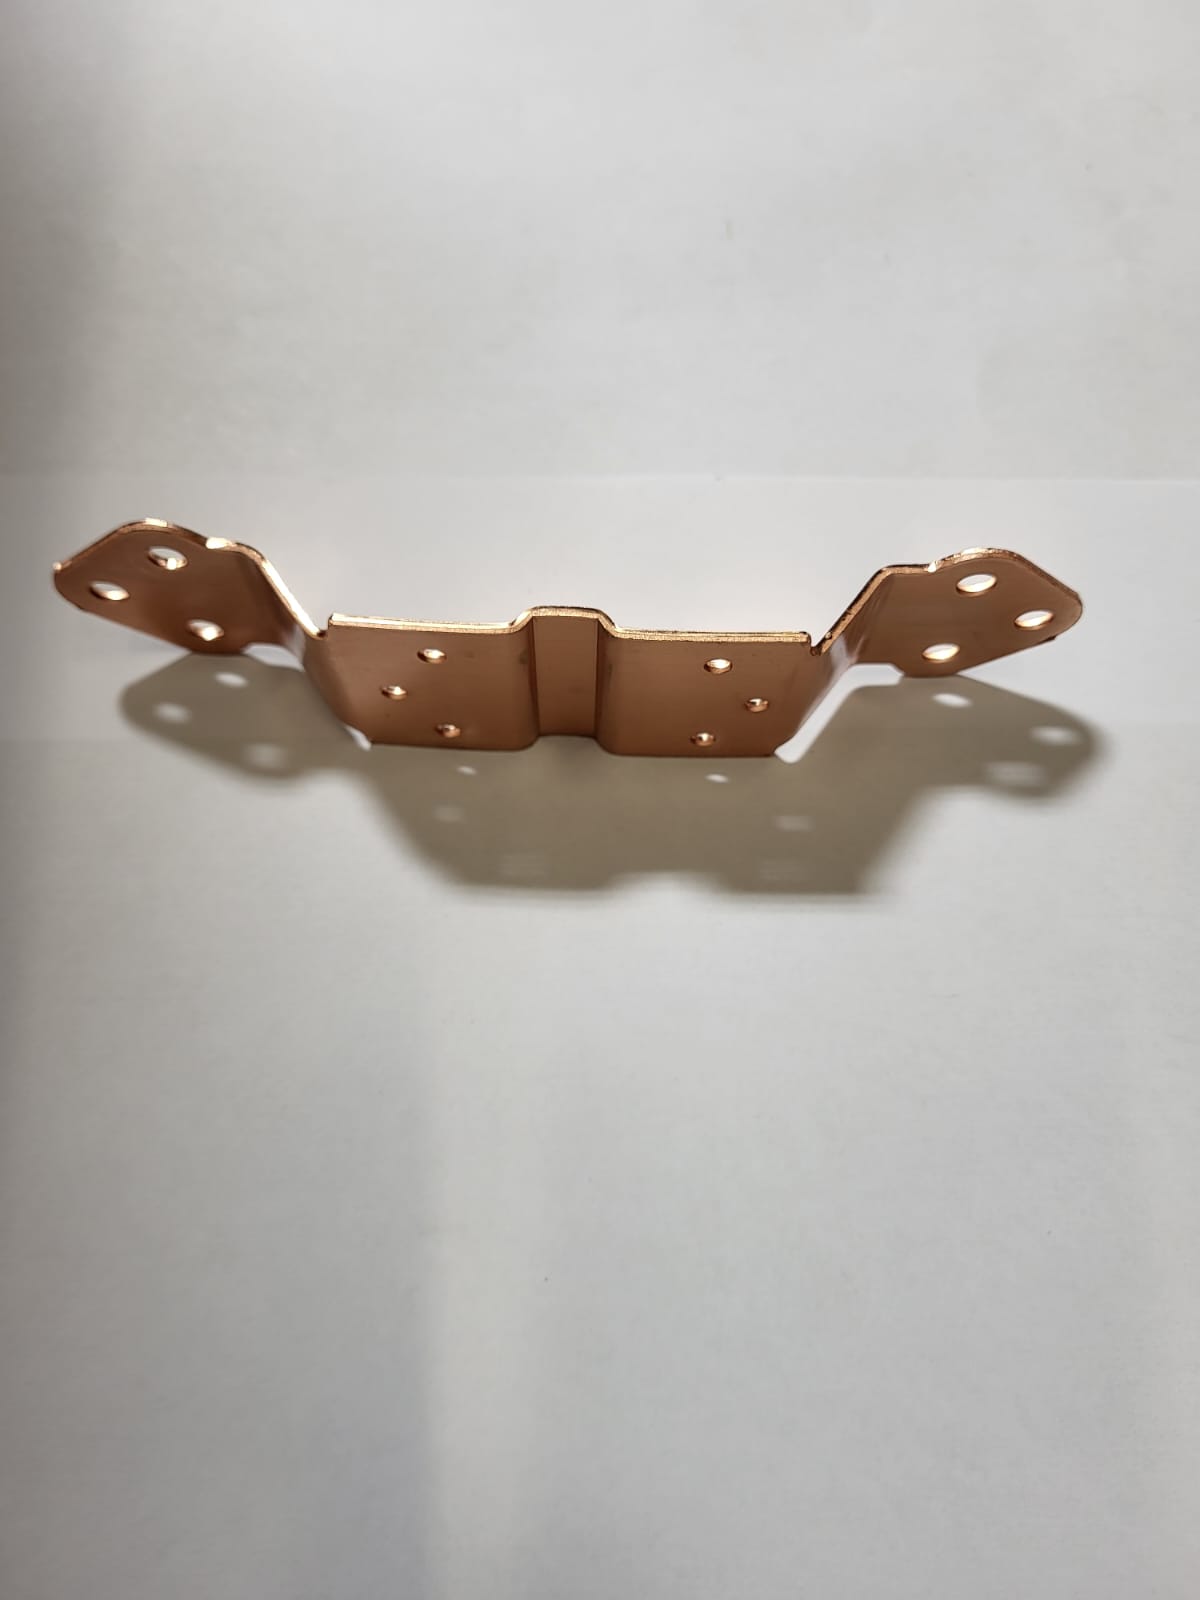 Case of 50 units Copper Downspout Cleat / Leader Bracket  3" or 4"